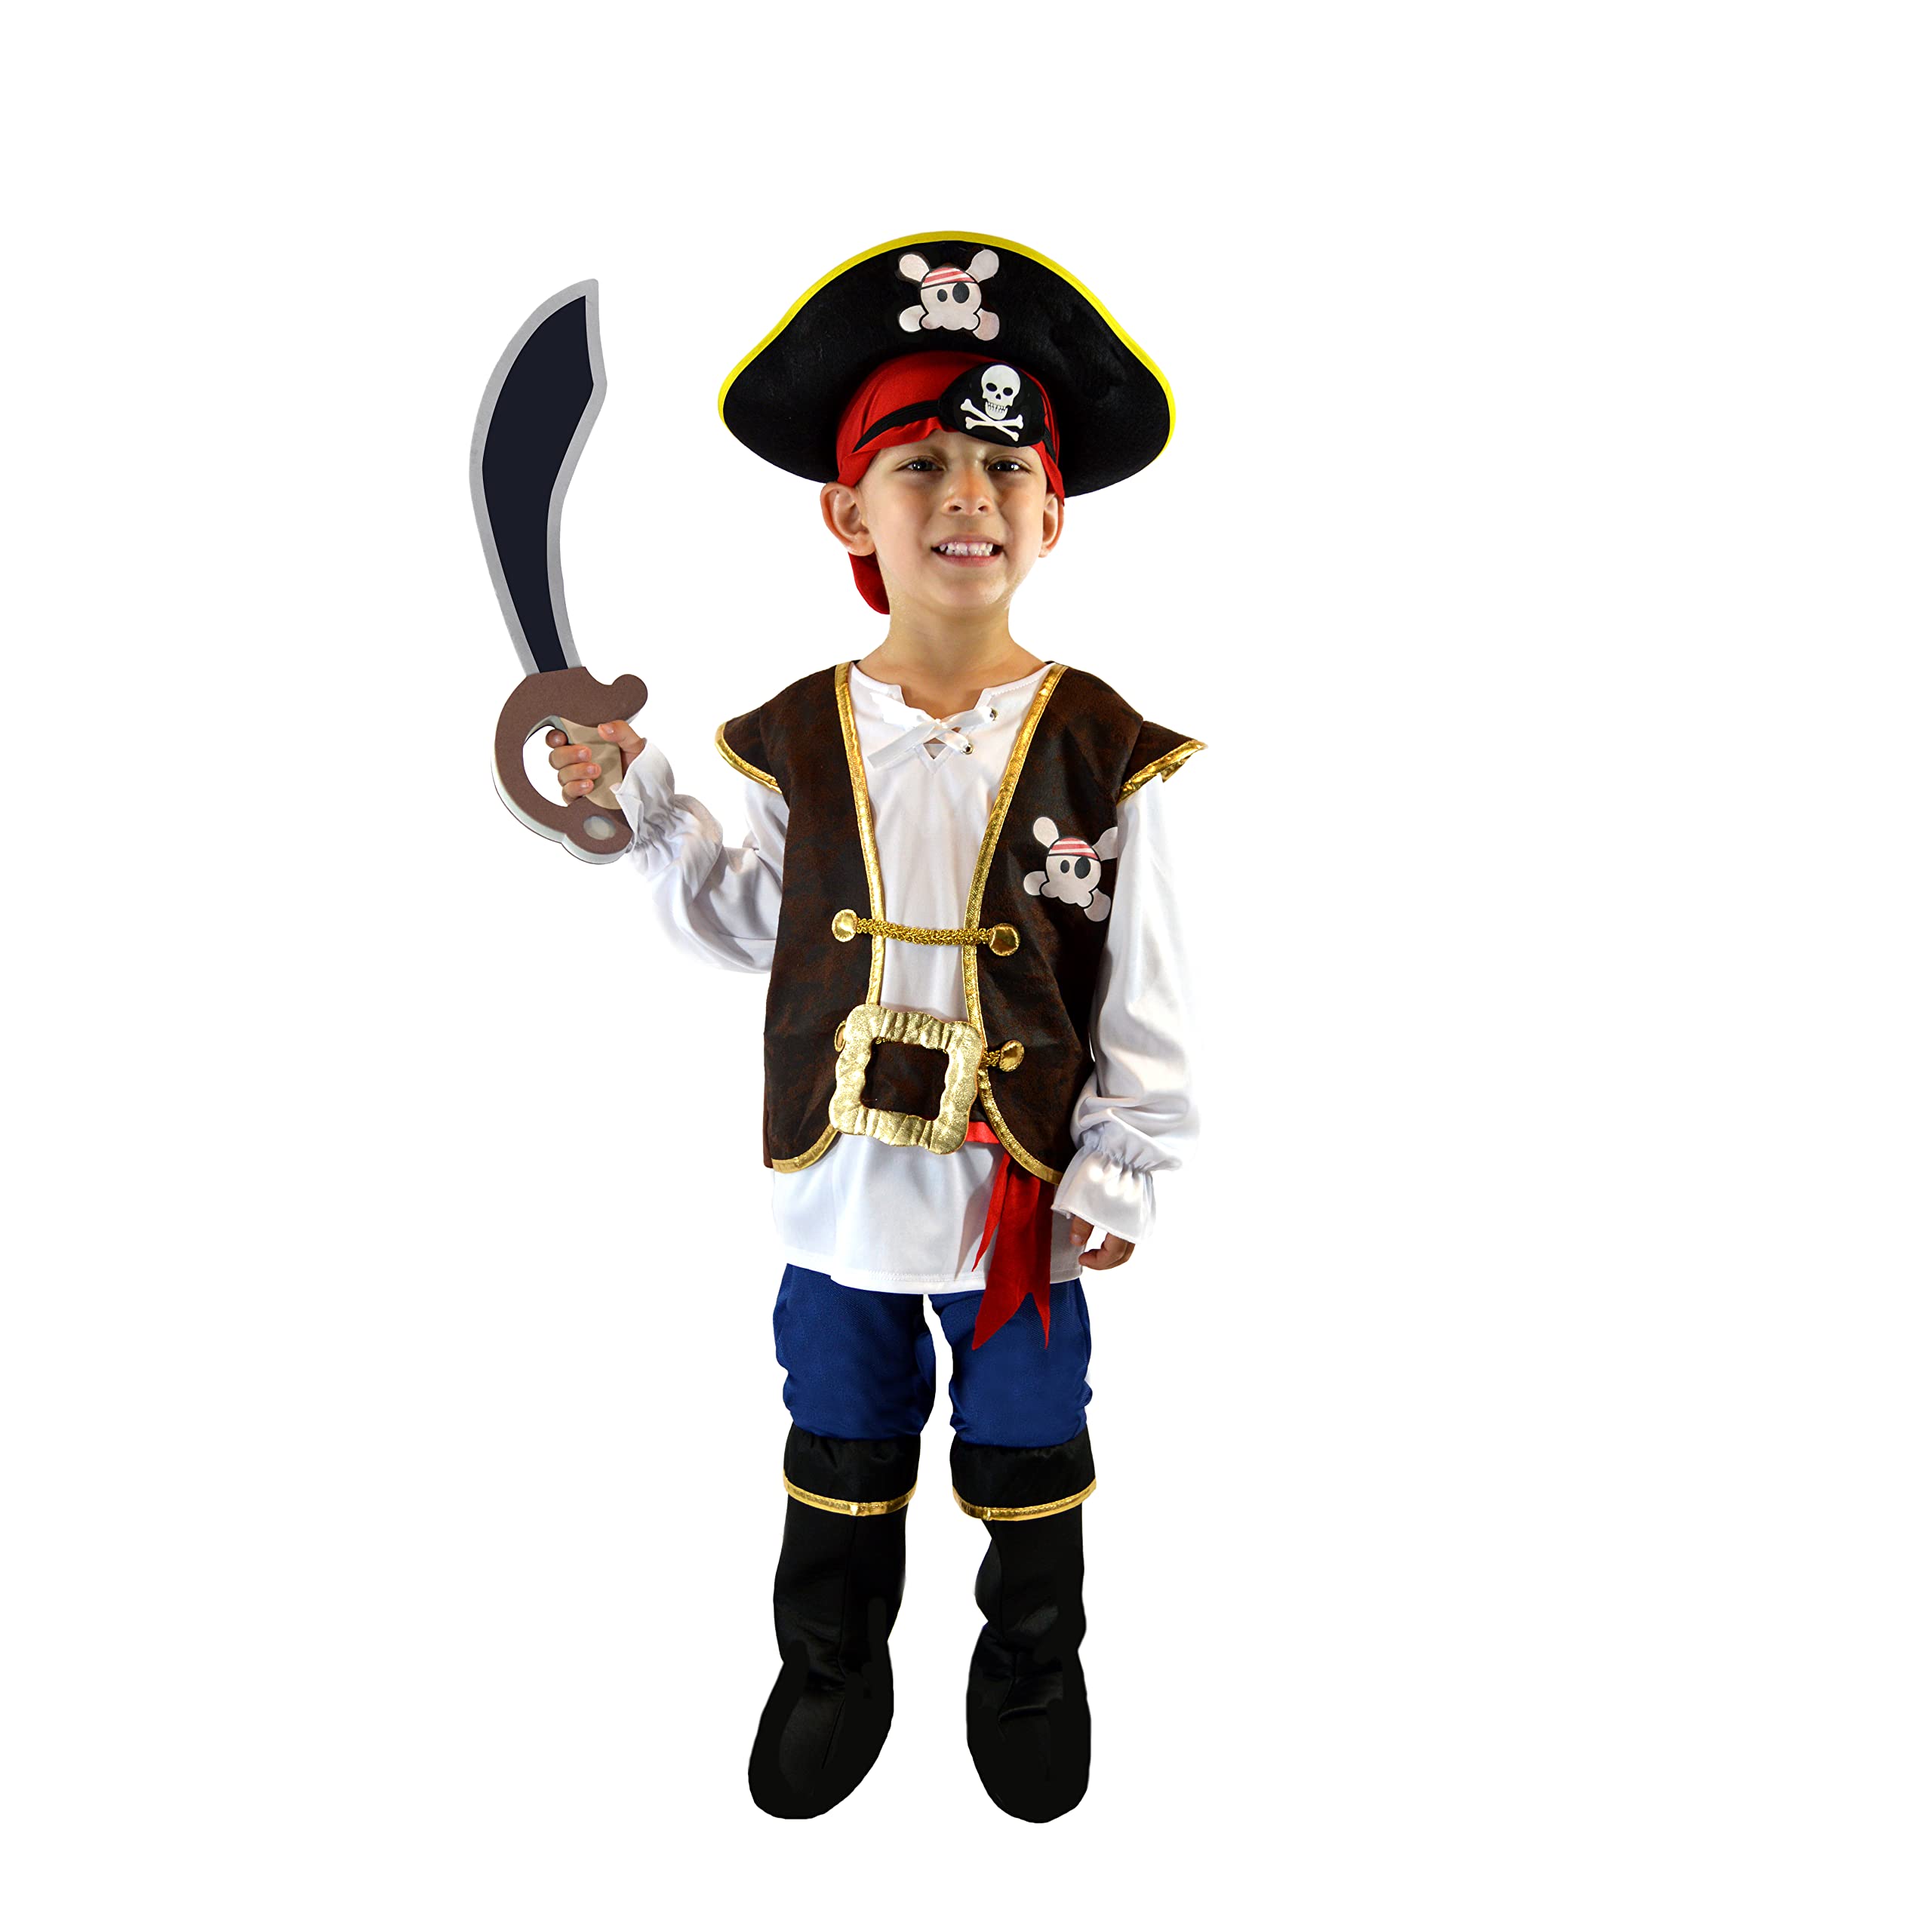 Spooktacular Creations Boys Pirate Costume for Kids Deluxe Costume Set